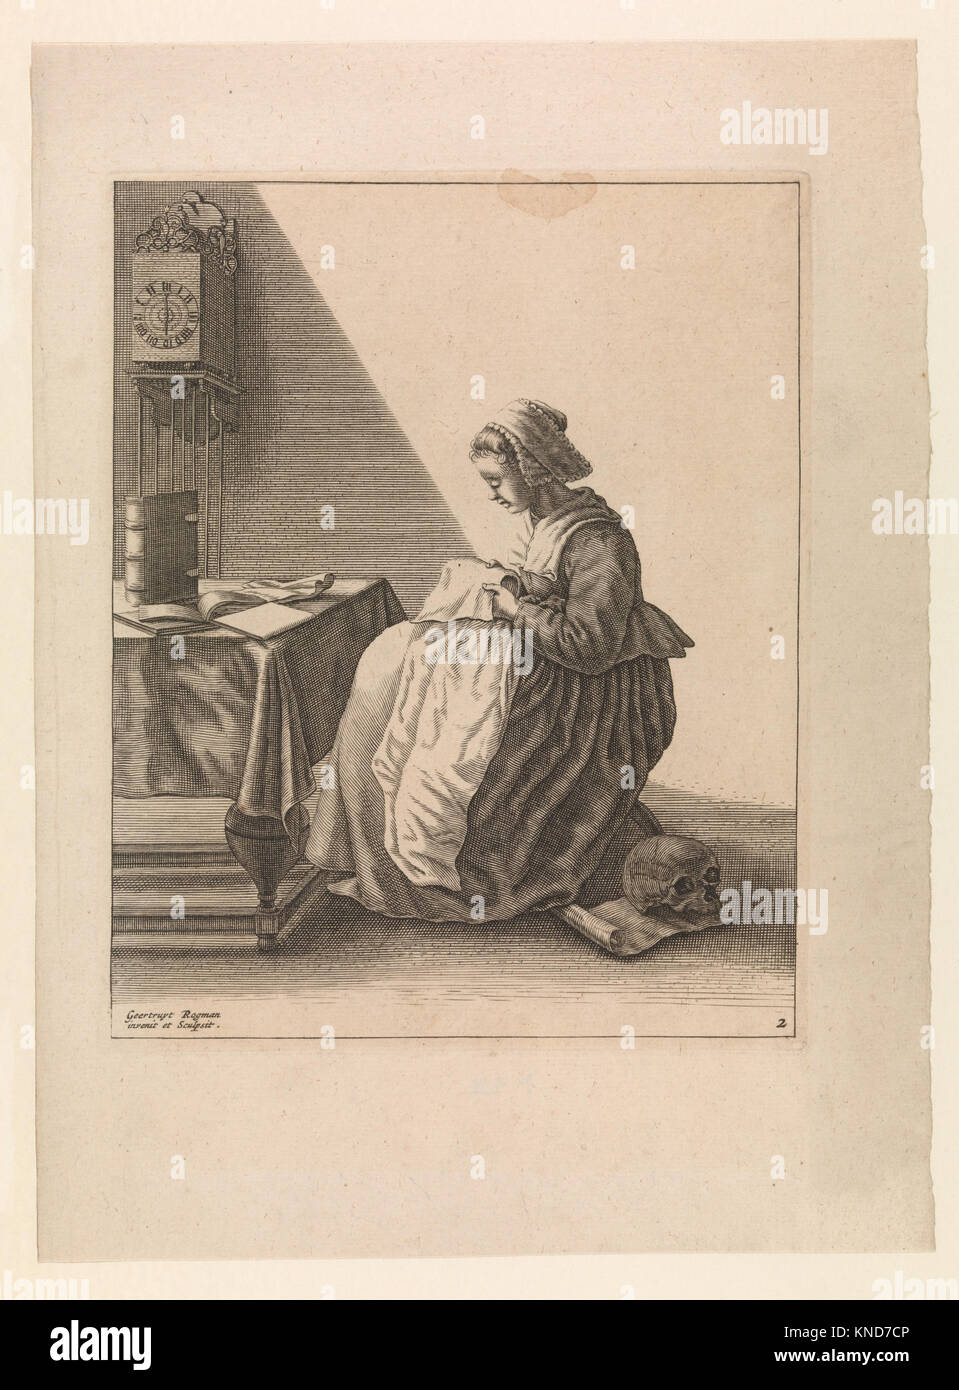 A Young Woman Ruffling, Plate 2 from Five Feminine Occupations MET DP-12294-001 387970 Artist: Geertruydt Roghman, Dutch, Amsterdam 1625?1651/57 Amsterdam (?), A Young Woman Ruffling, Plate 2 from Five Feminine Occupations, ca. 1640?57, Engraving, Plate: 8 1/16 x 6 1/2 in. (20.5 x 16.5 cm) Sheet: 11 1/8 x 8 1/4 in. (28.3 x 21 cm). The Metropolitan Museum of Art, New York. The Elisha Whittelsey Collection, The Elisha Whittelsey Fund, 1956 (56.550.3) Stock Photo